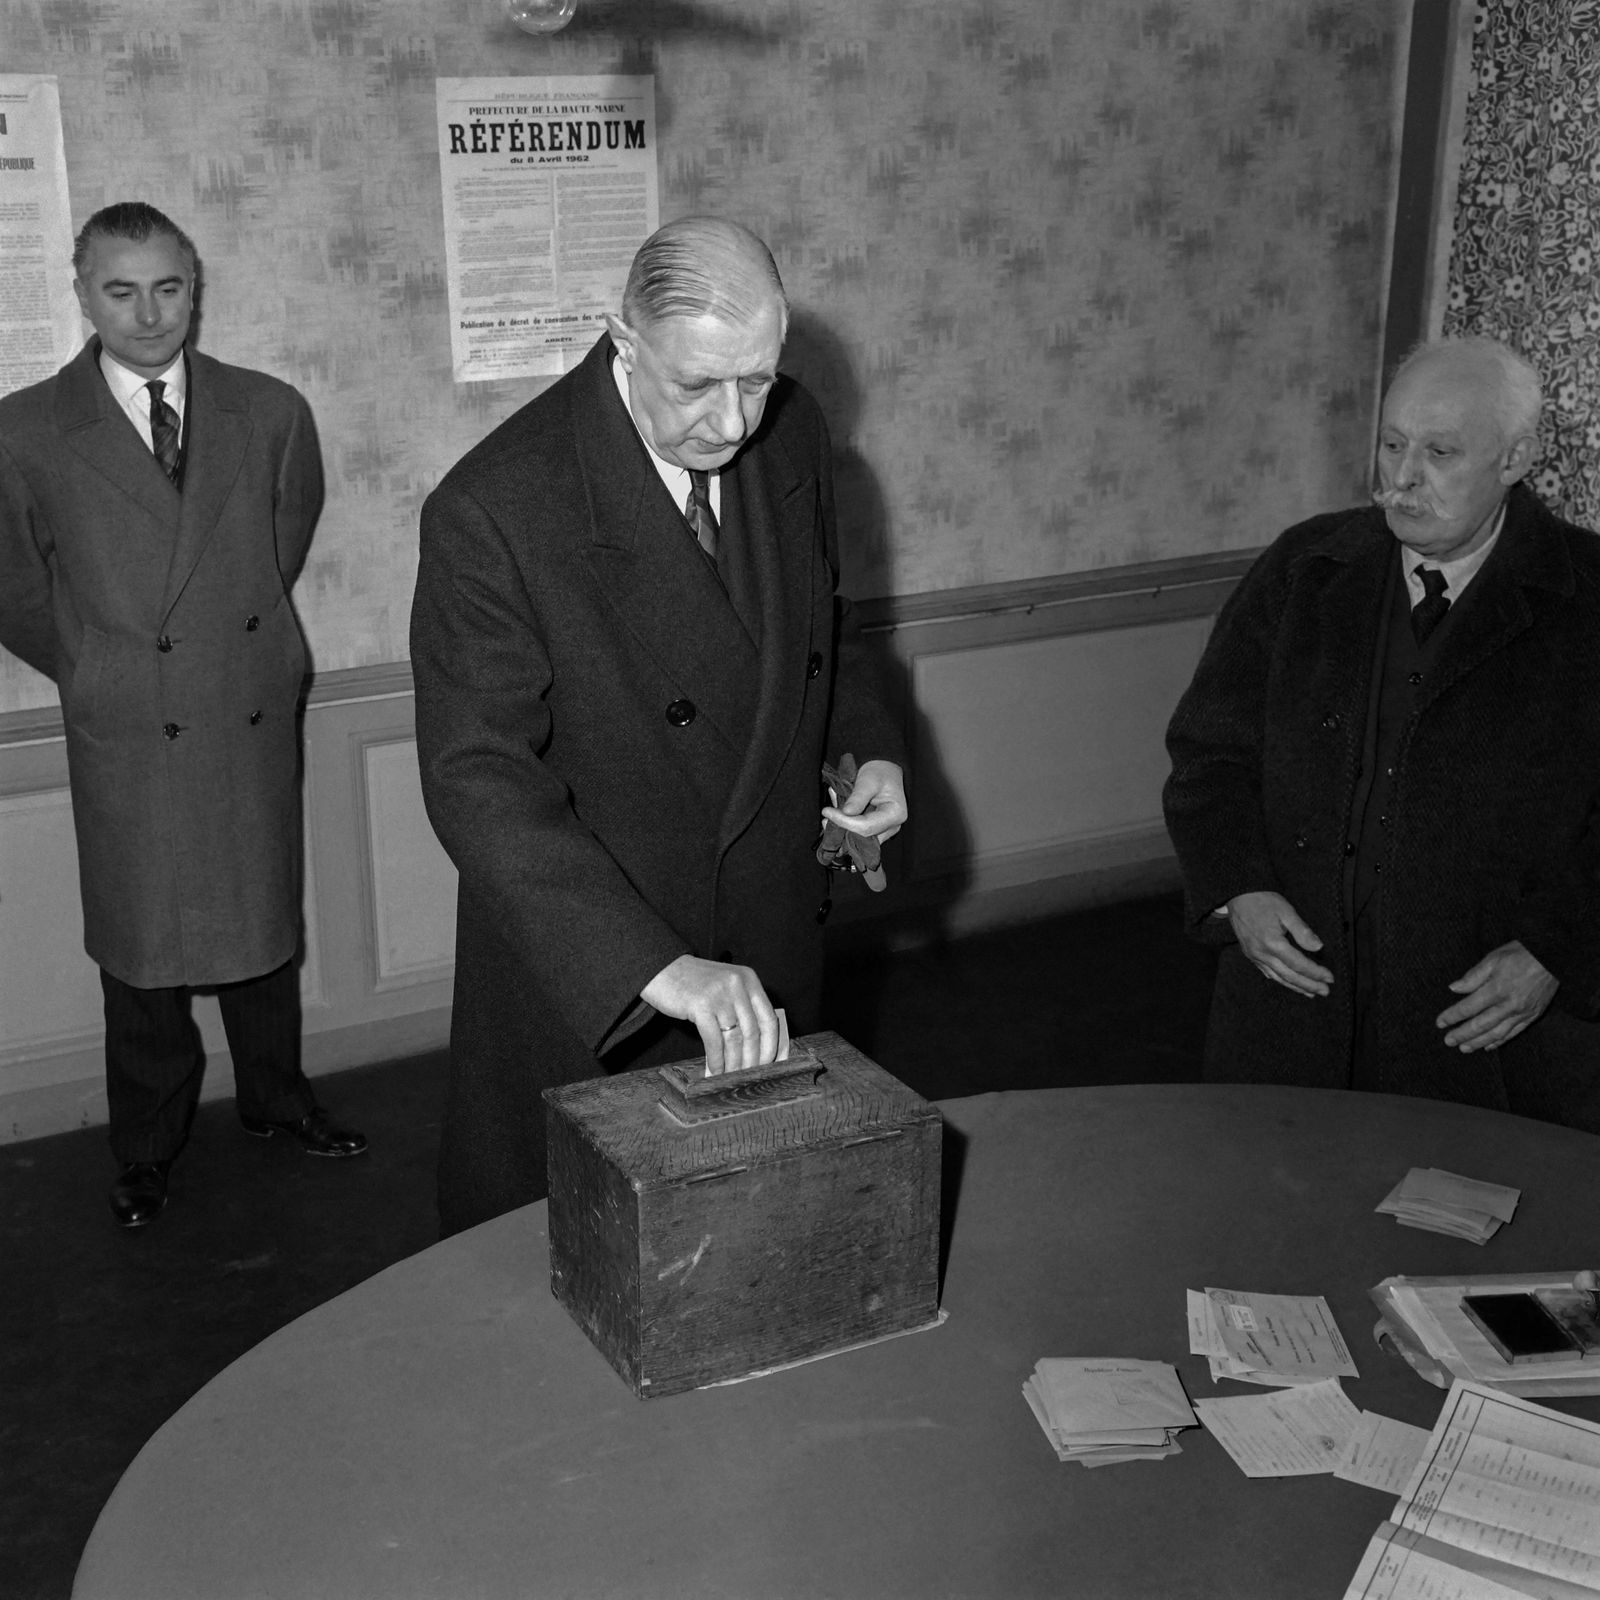 (FILES) In this file photo taken on April 8, 1962, French President of the Republic General Charles de Gaulle votes at the polling station of the town hall of Colombey-les-Deux-Eglises, for the referendum on the Evian Accords and the independence of Algeria. - The Evian Accords were signed on March 18, 1962, between France and the Provisional Government of the Algerian Republic (GPRA), the government-in-exile of the Algerian National Liberation Front (FLN), ending the Algerian War of 1954-1962 and pathing the way for Algeria's Independence from France. (Photo by AFP) - AFP